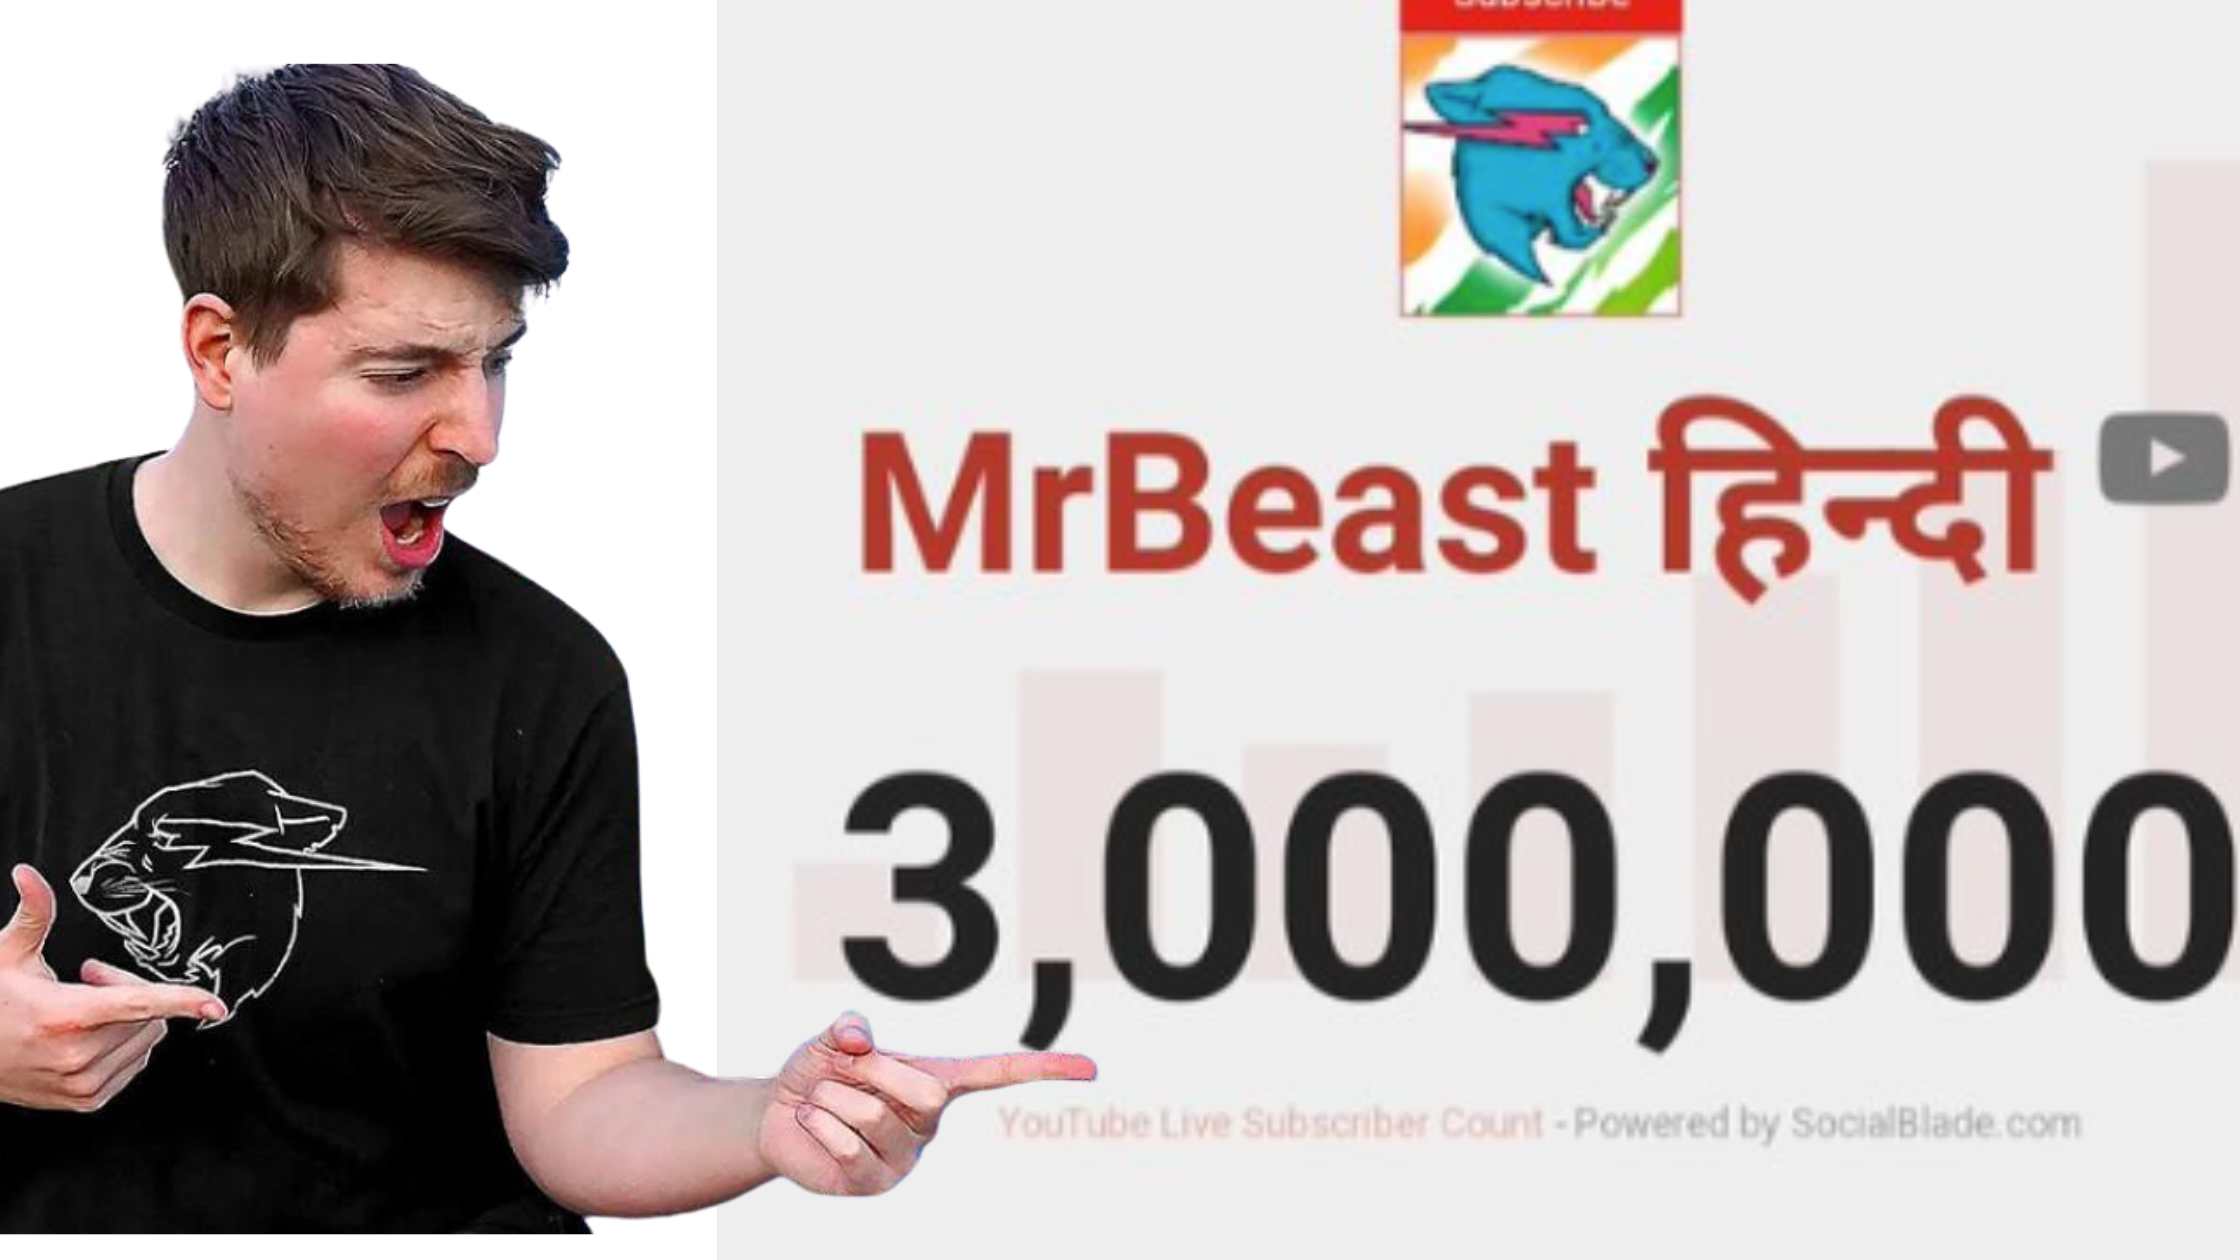 Hindi Version of MrBeast's YouTube Channel Crosses 3 Million Subscribers!